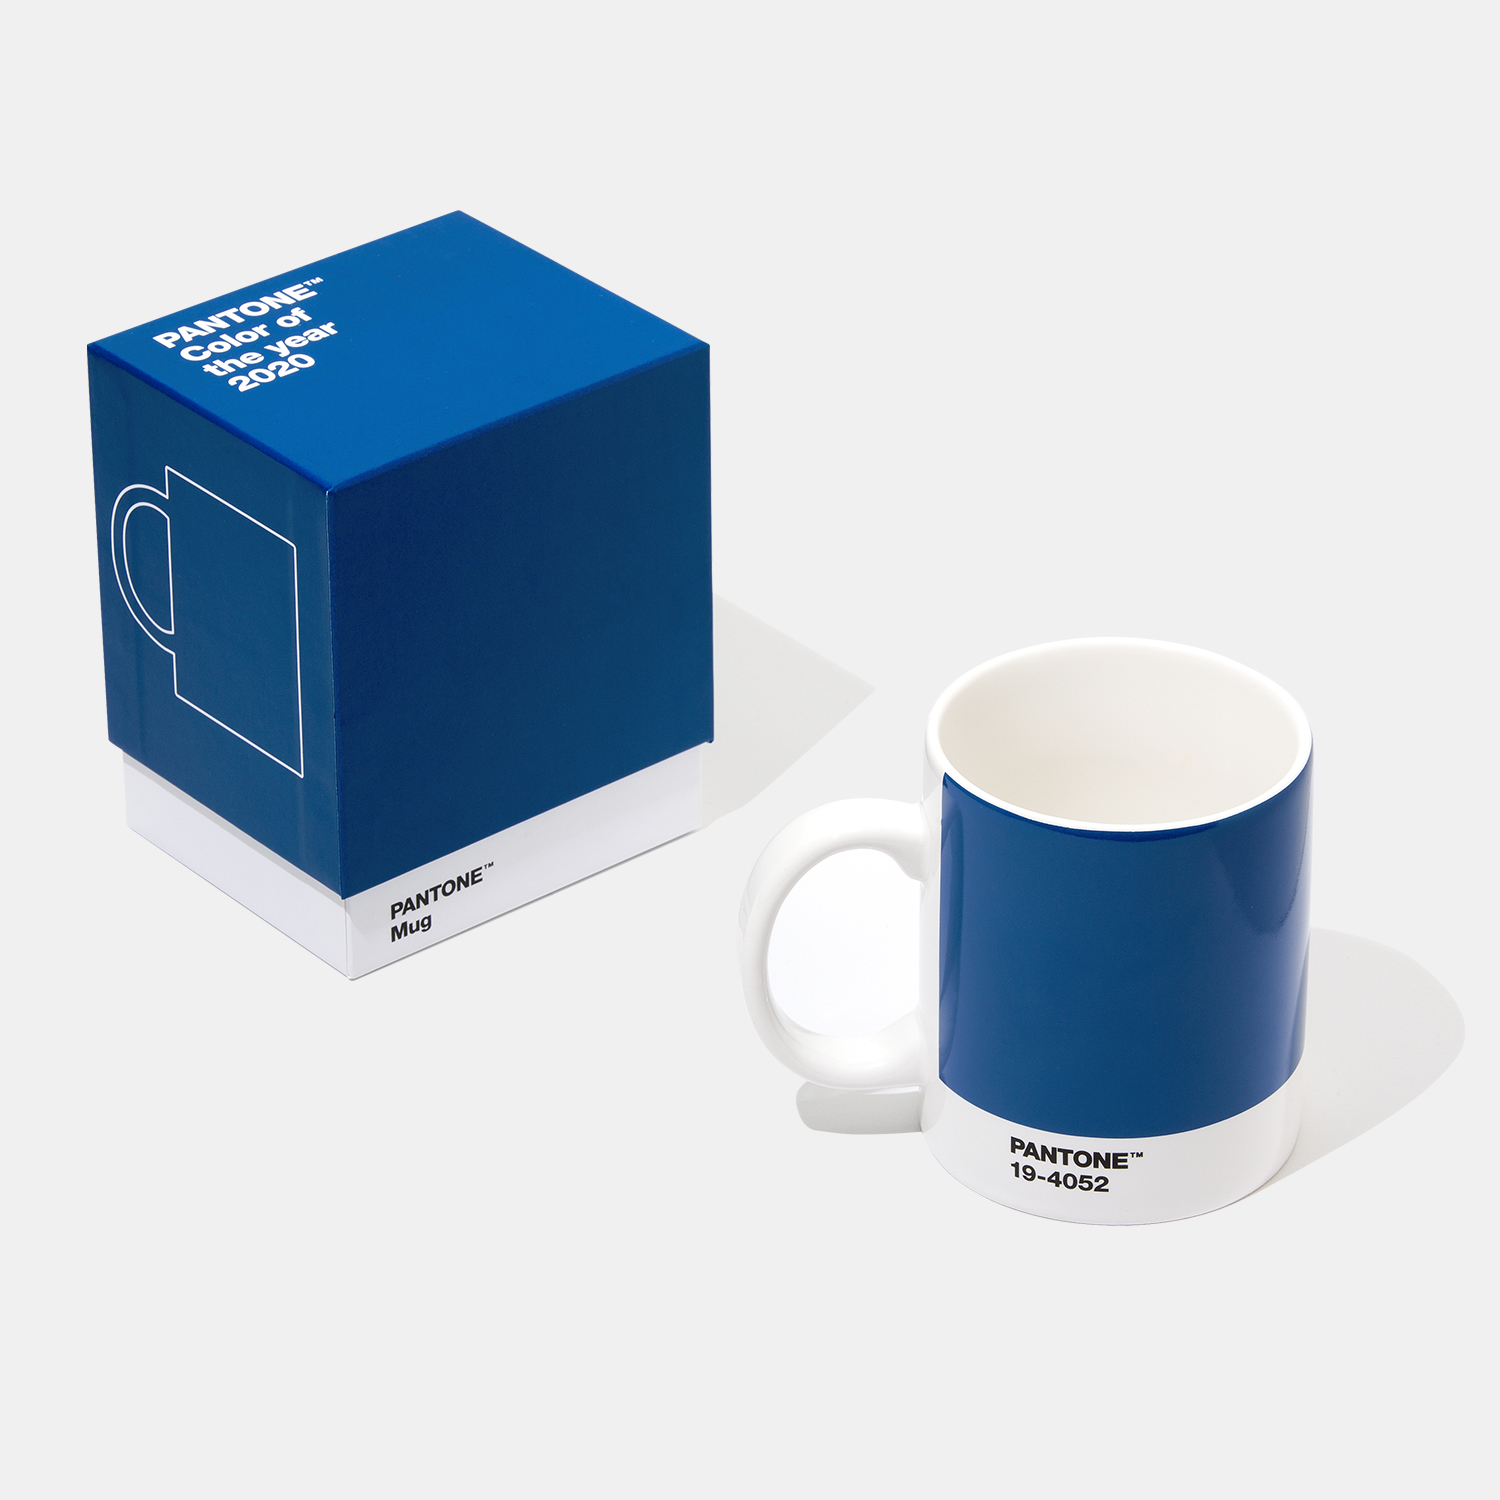 Pantone Limited Edition Mug, Pantone Color of the Year 2020 Classic Blue - View 2